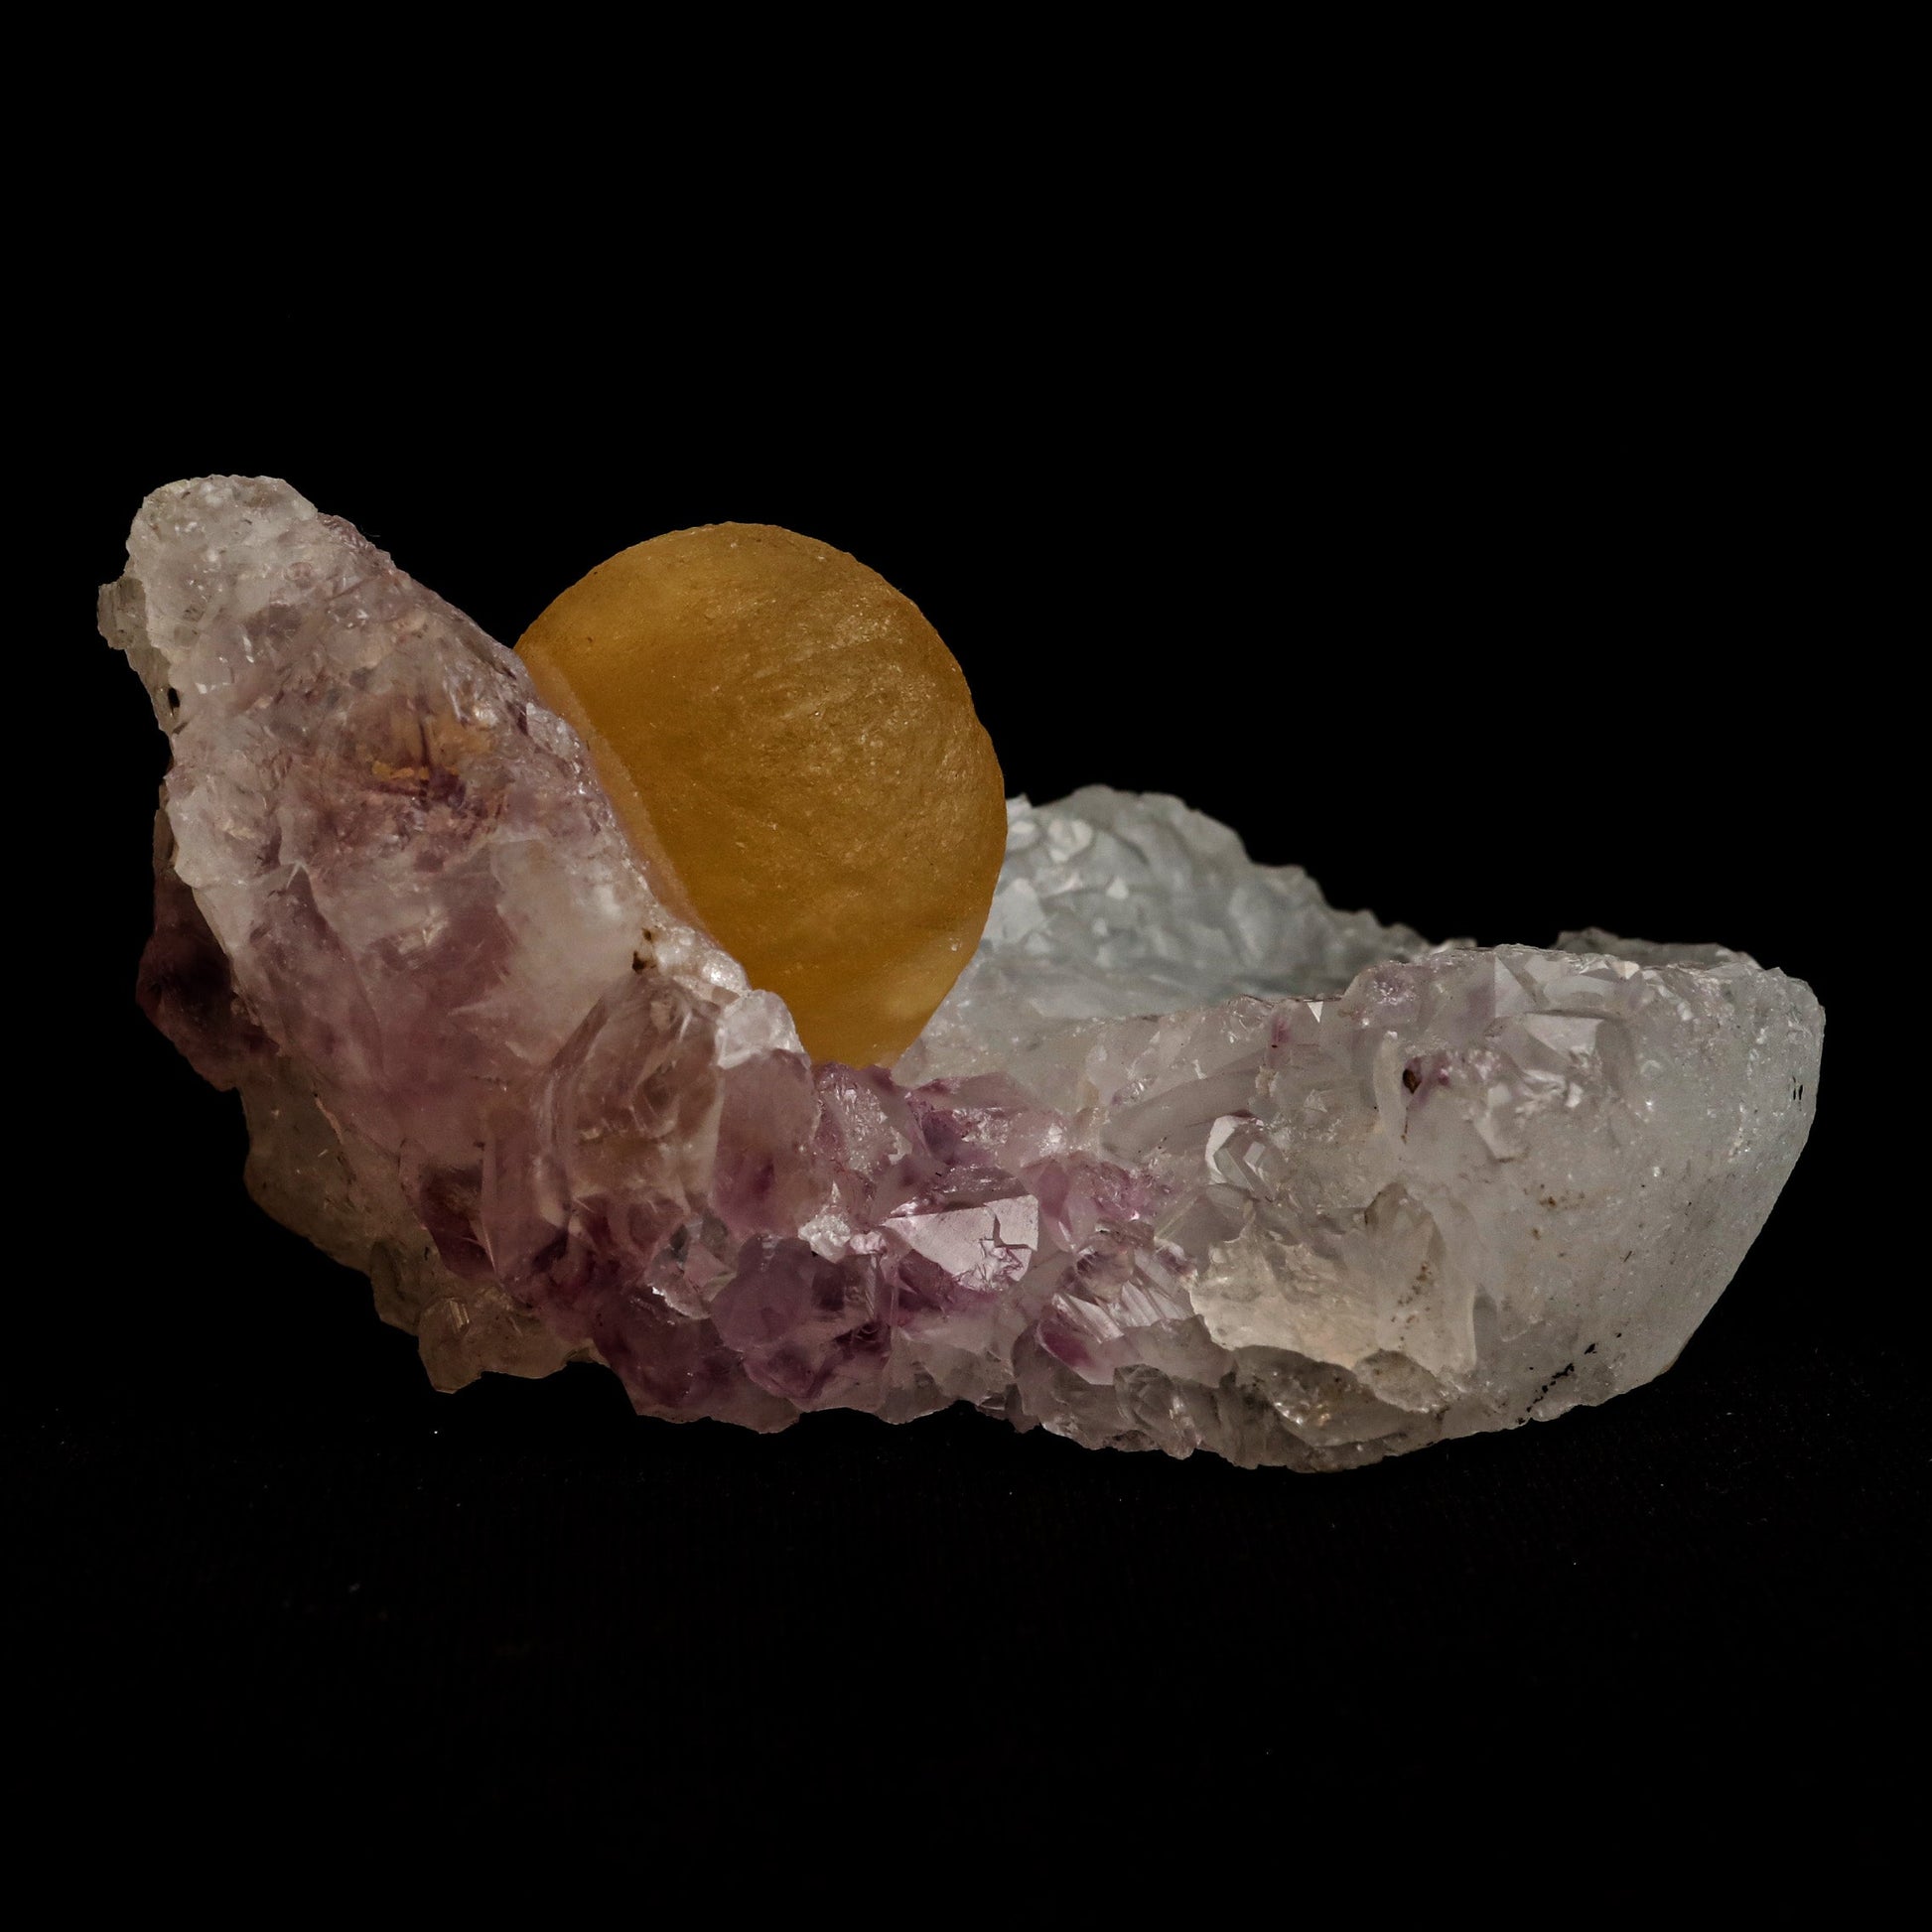 Fluorite Botryoidal on Amethyst Natural Mineral Specimen # B 5058  https://www.superbminerals.us/products/fluorite-botryoidal-on-amethyst-natural-mineral-specimen-b-5058  Features: An extraordinarily botryoidal "ball" of Fluorite is perched atop an exceptionally rich purple coloured Amethyst on Chalcedony and host rock matrix, creating an unusually beautiful specimen.&nbsp; On the surface, the Fluorite is a creamy-white tone that gradually fades away to a golden hue in the middle.